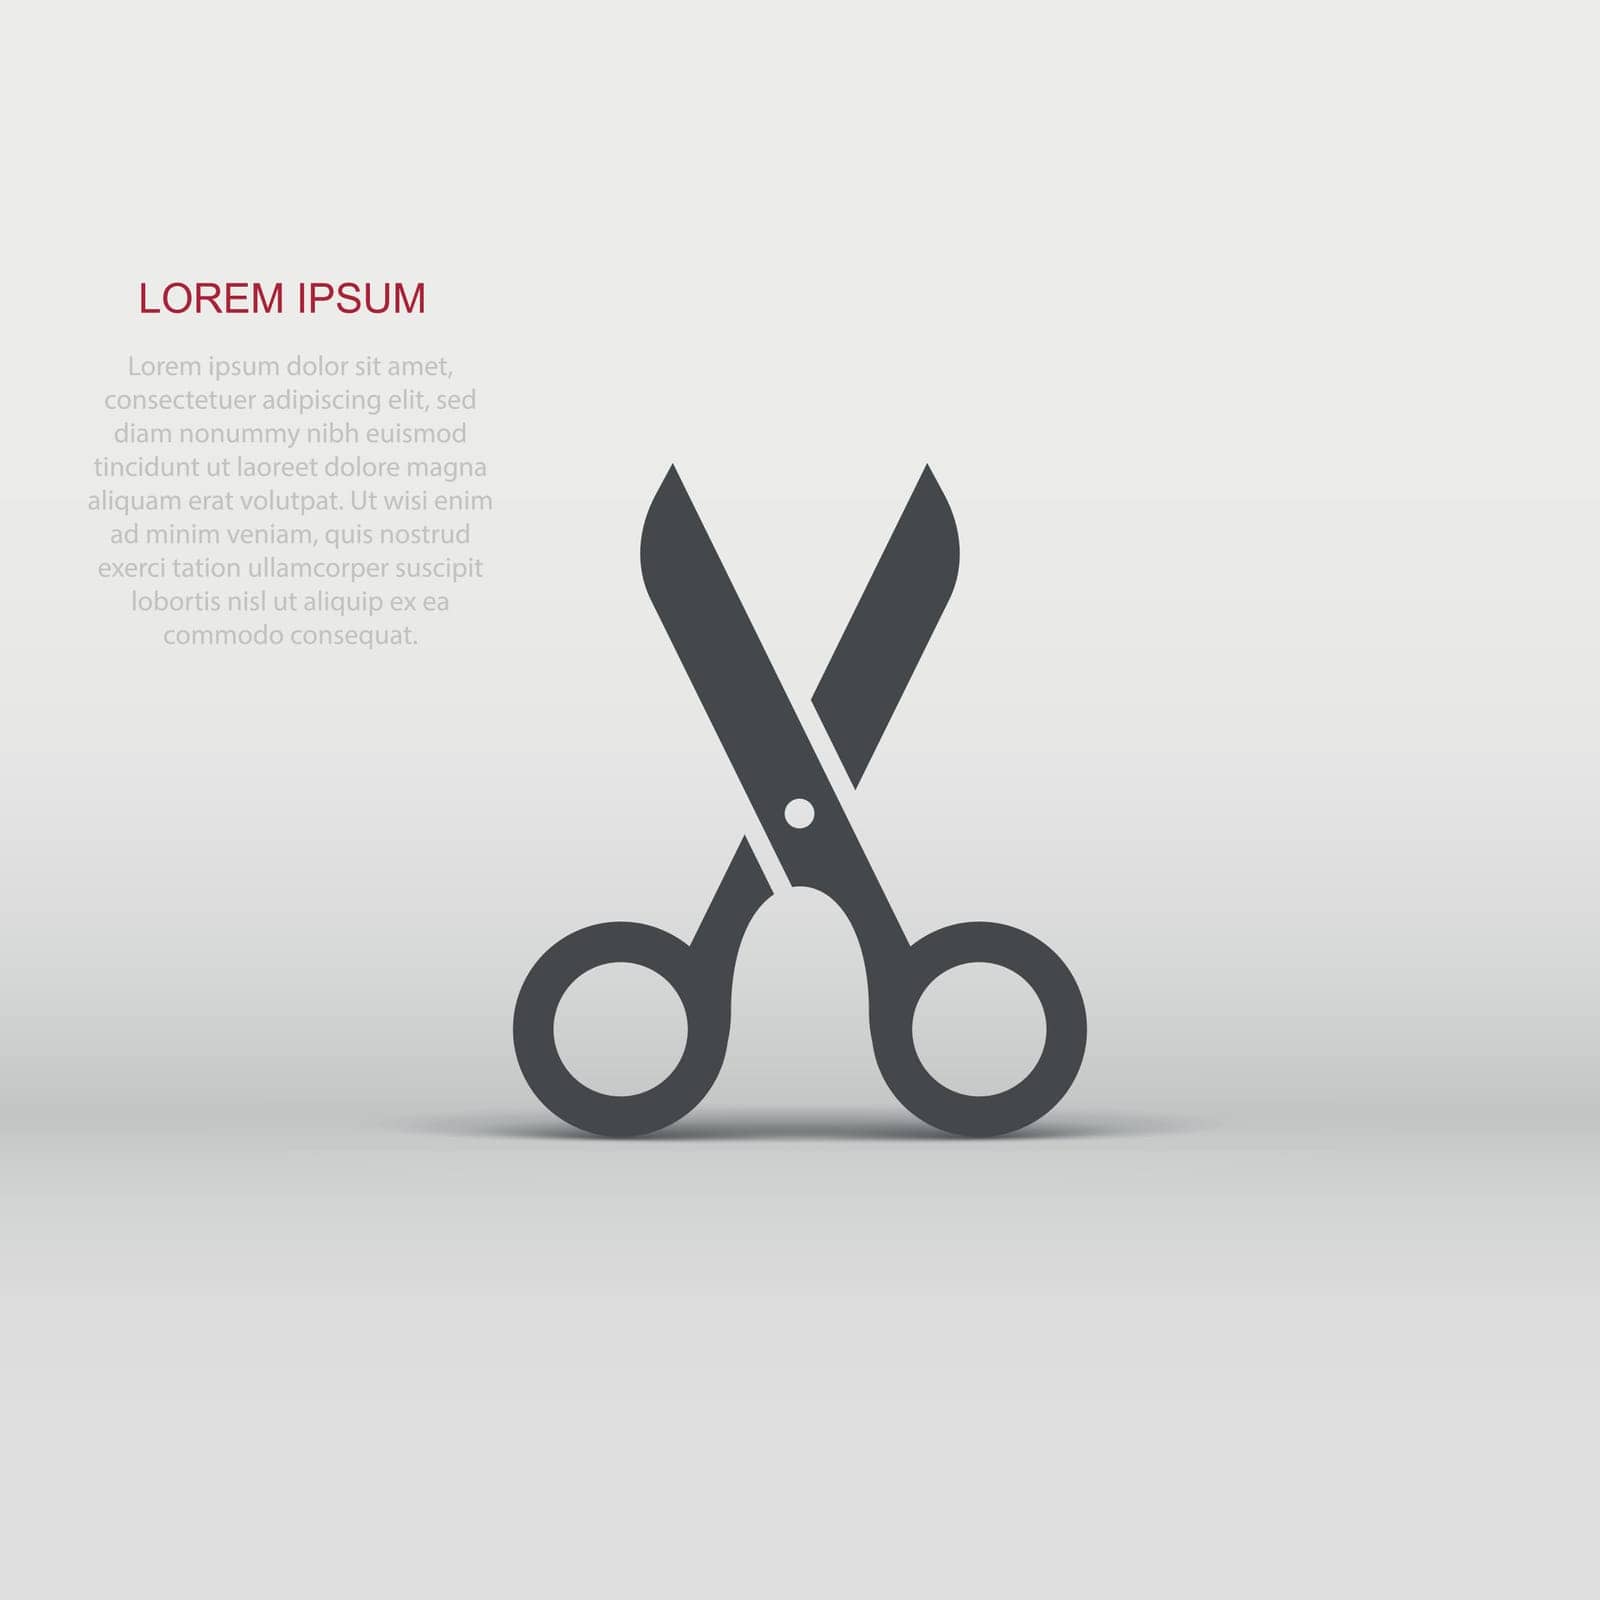 Scissor icon in flat style. Cut equipment vector illustration on white isolated background. Cutter business concept.